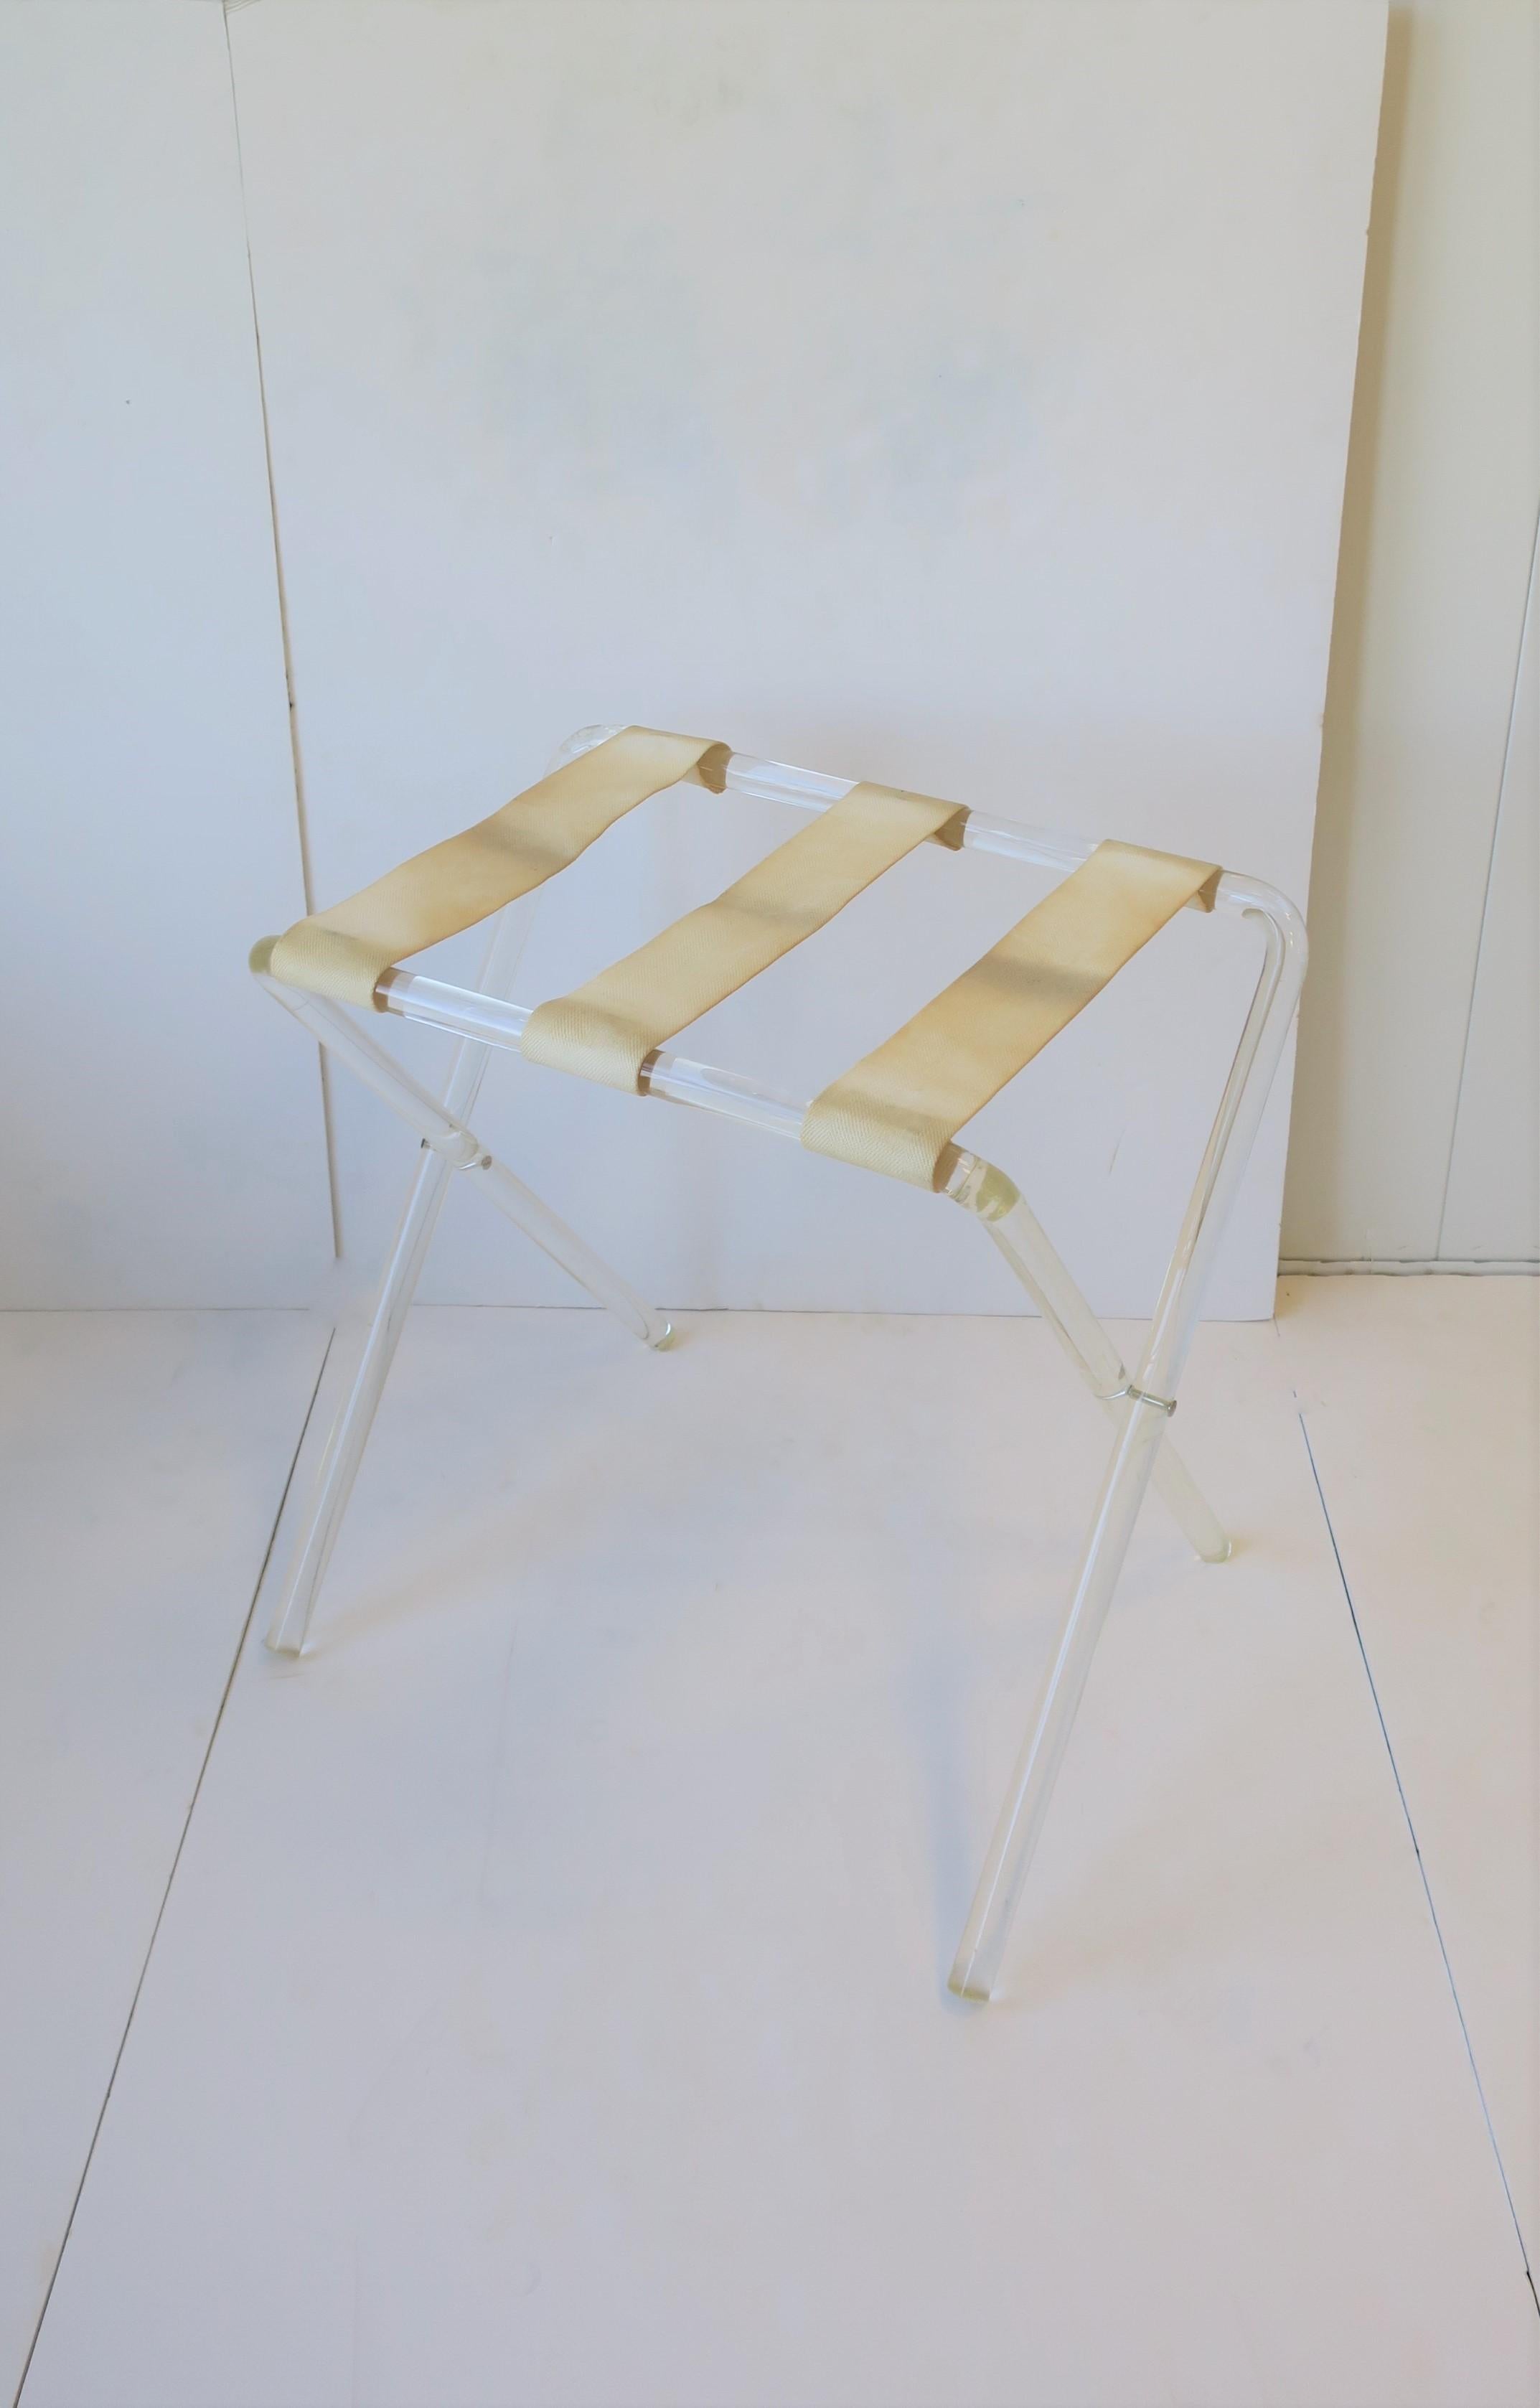 '70s Modern Lucite folding luggage rack or stand with canvas straps, circa 1970s-1980s, late-20th century. Two (2) available, each sold separately as per listing. 

Measurements: 15.5